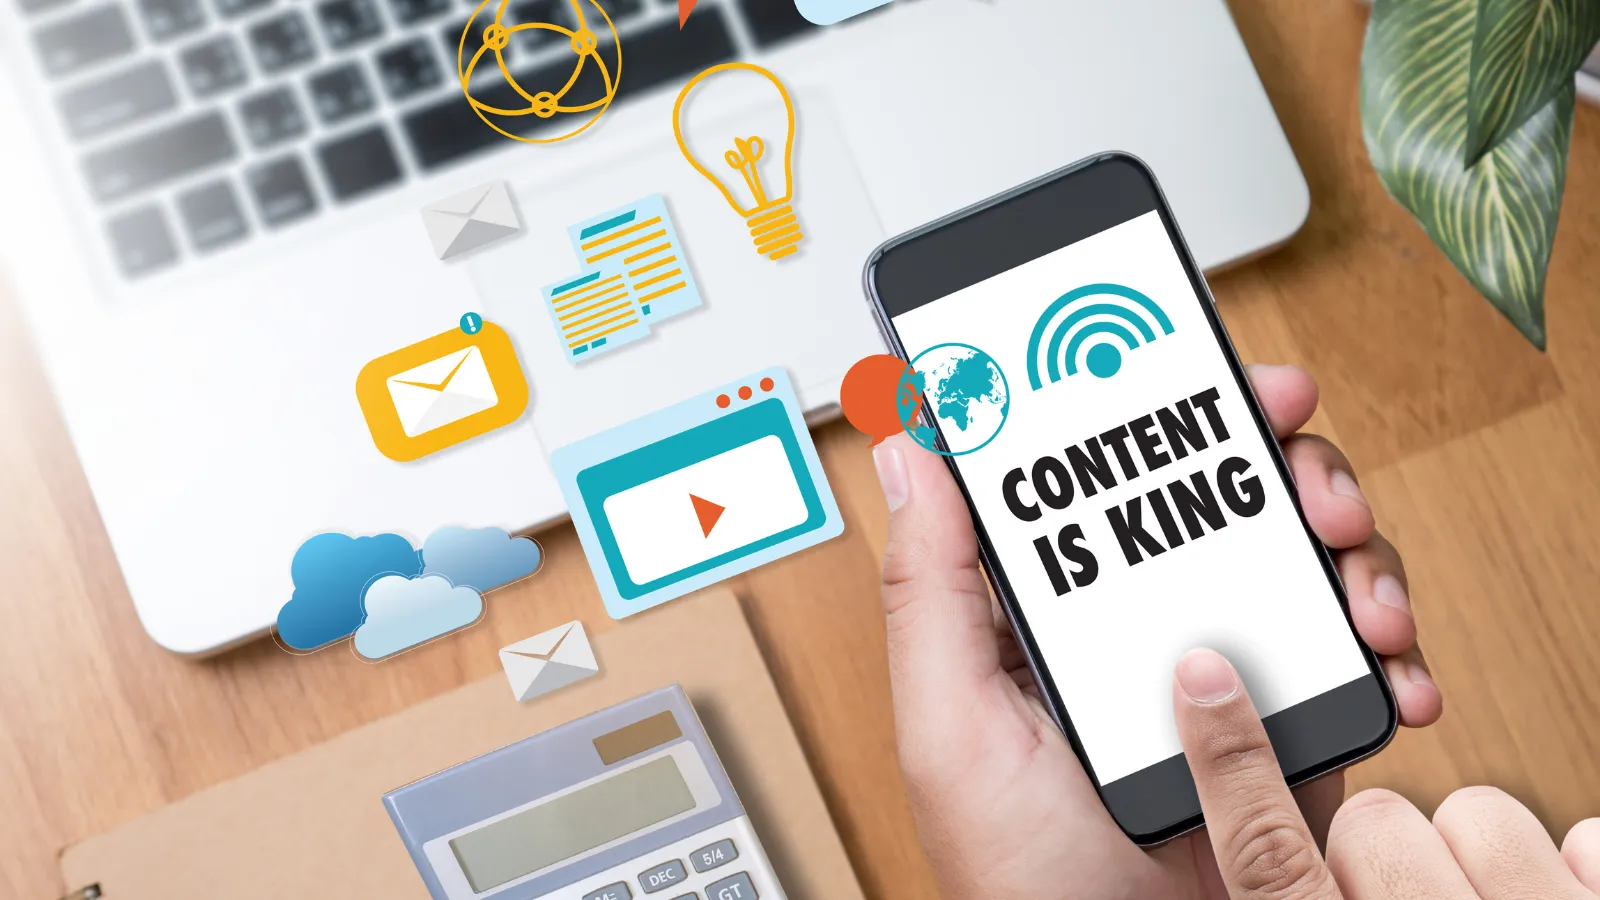 content is king on mobile